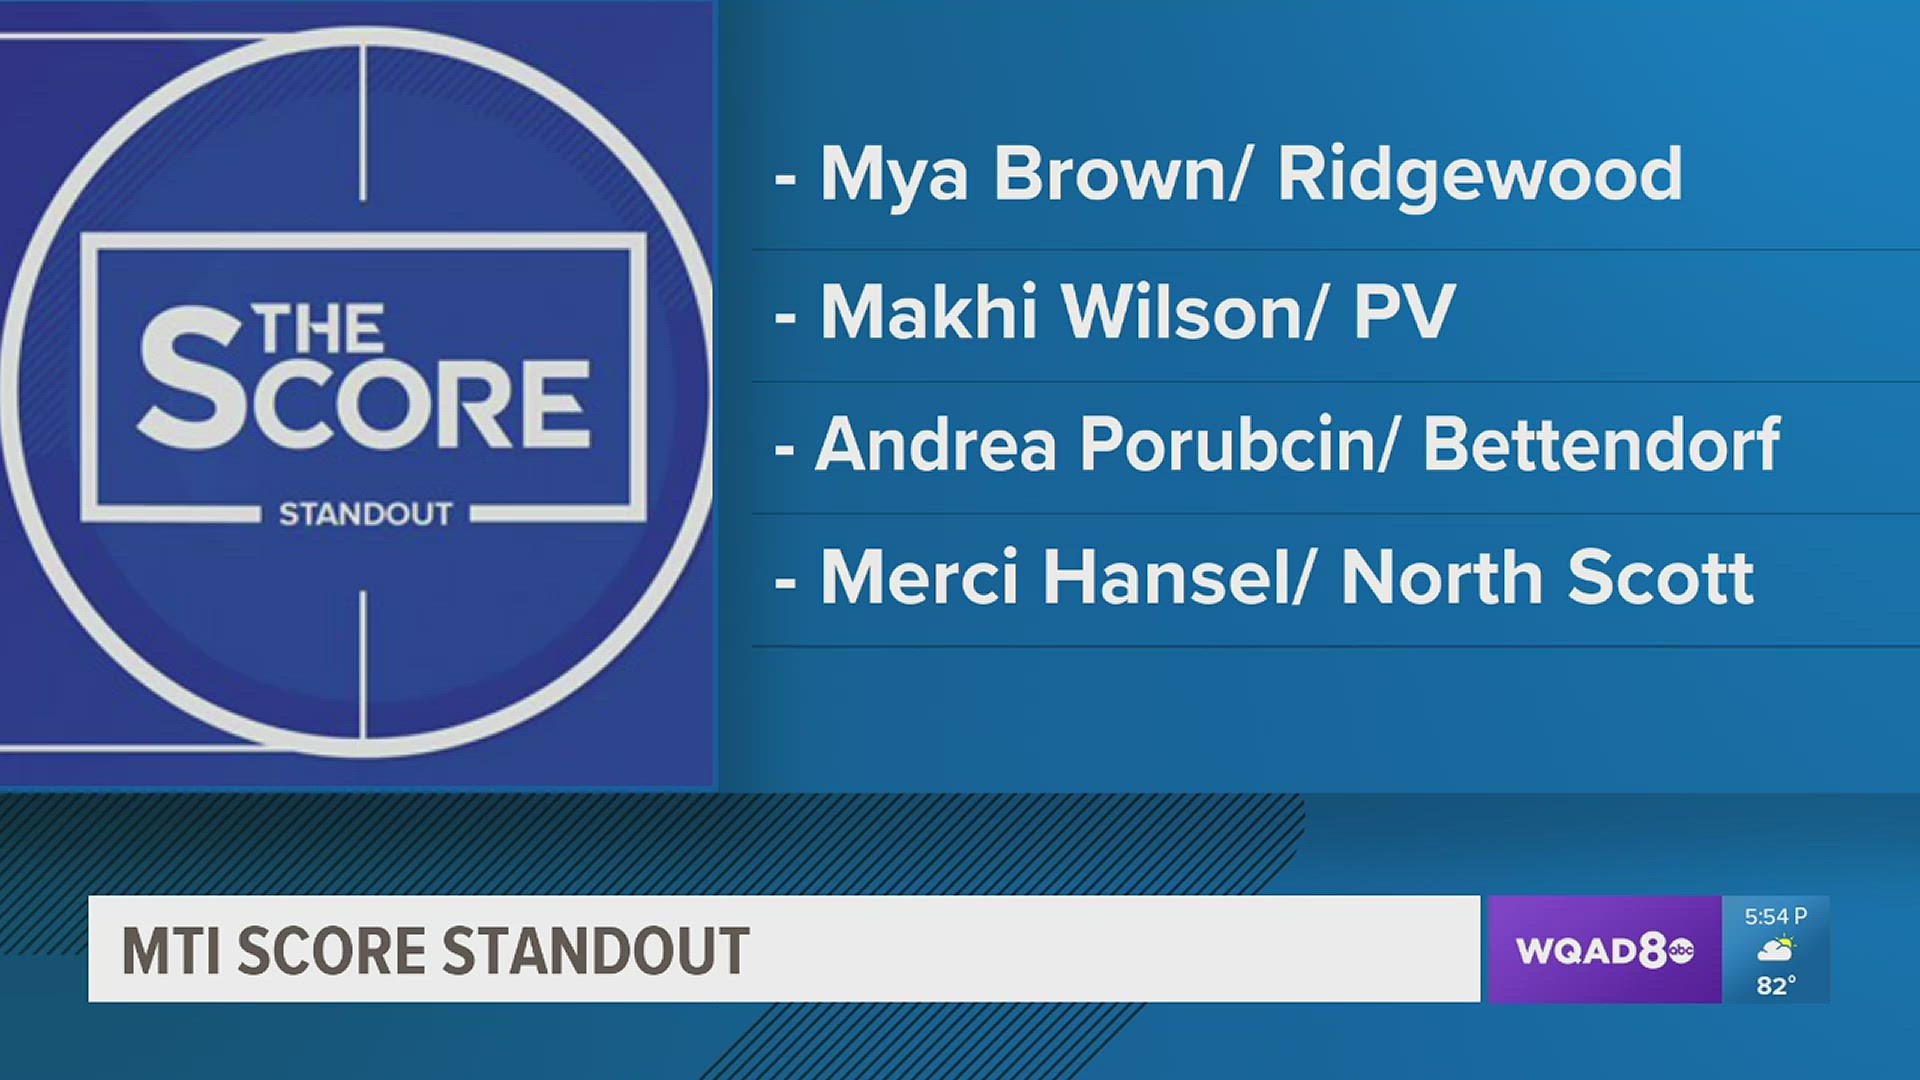 Vote for this weeks Midwest Technical Institute Score Standout.